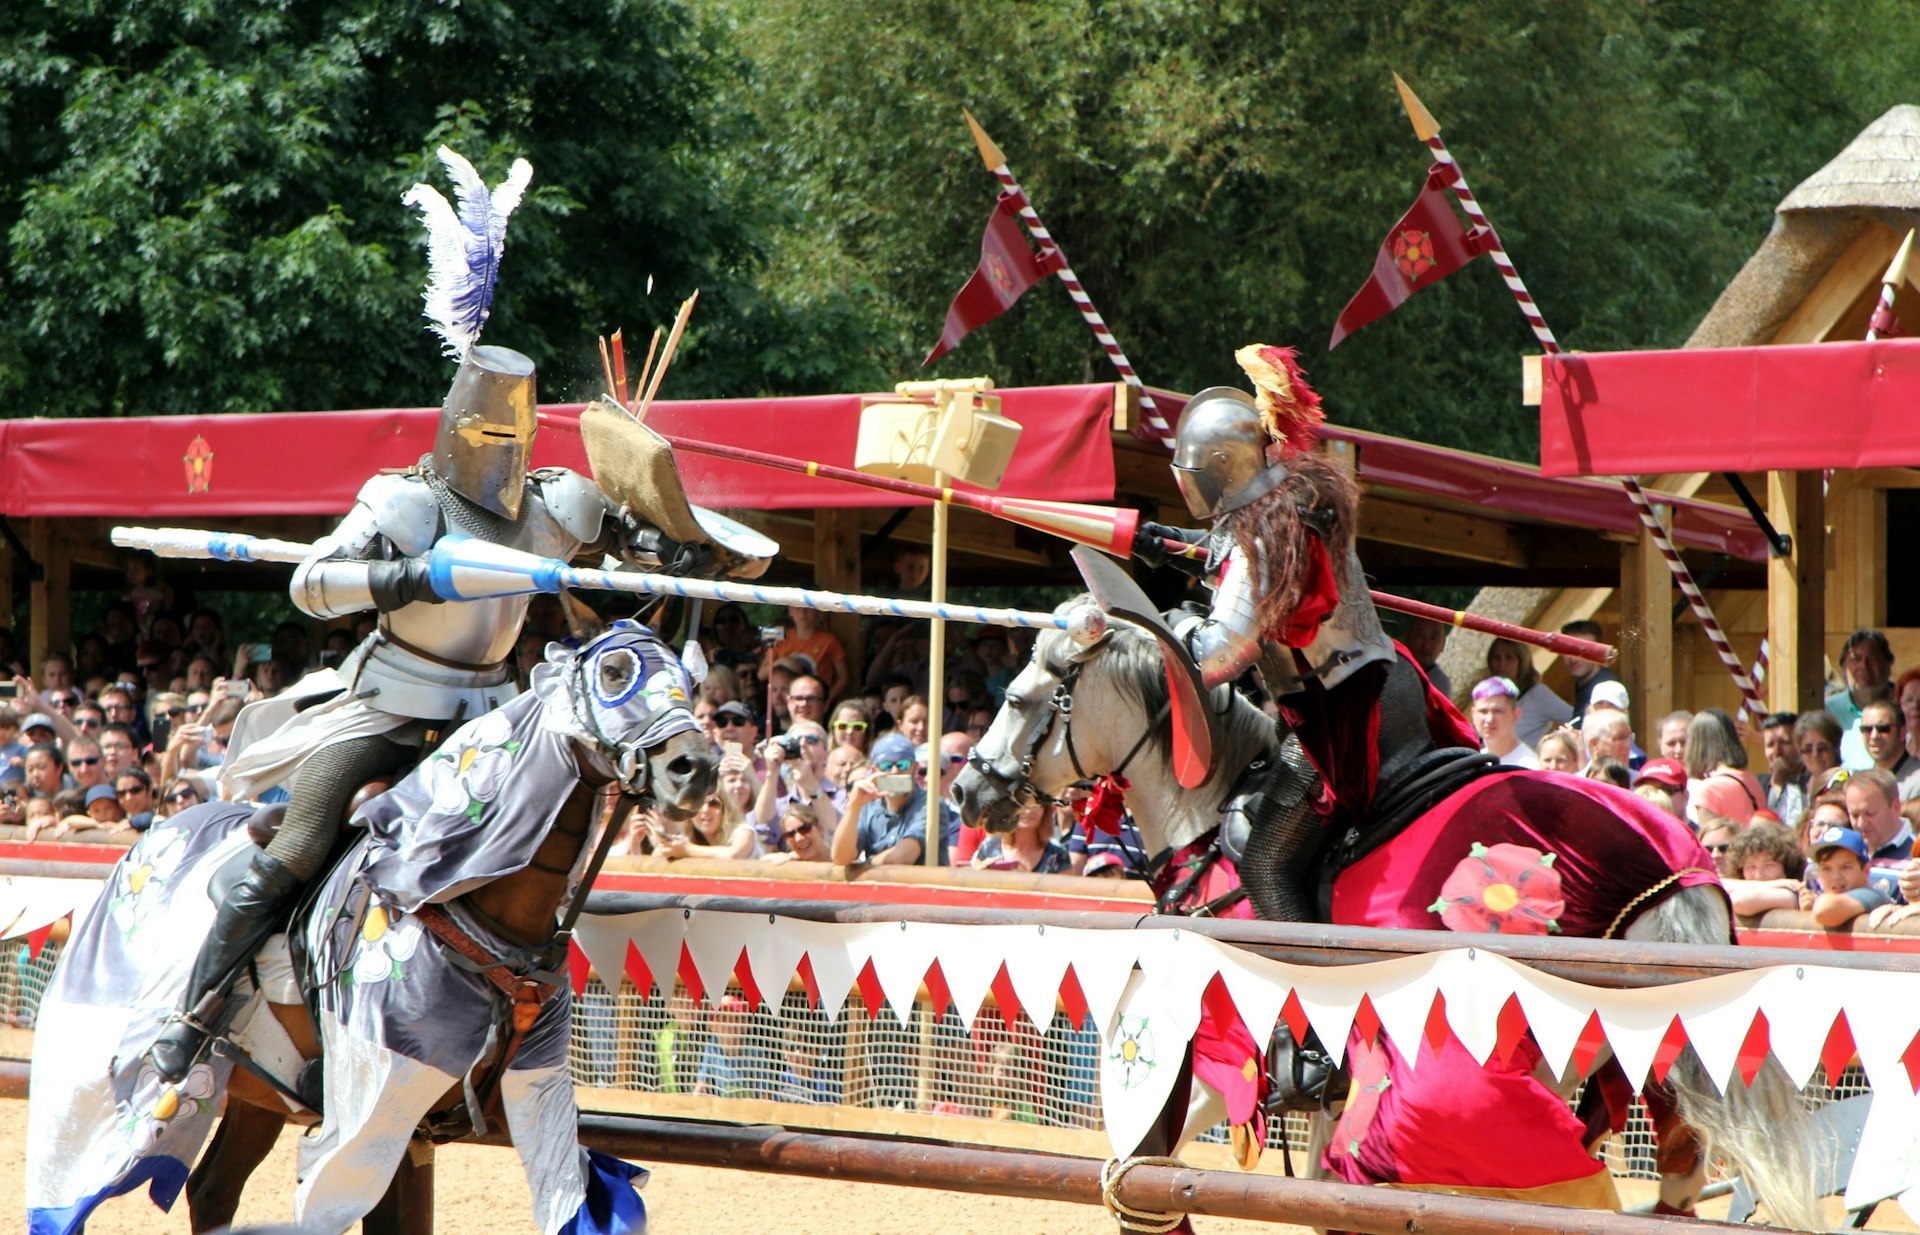 Two knights in armour riding horses approach each other with jousting sticks in a battle re-enactment with a crowd of onlookers